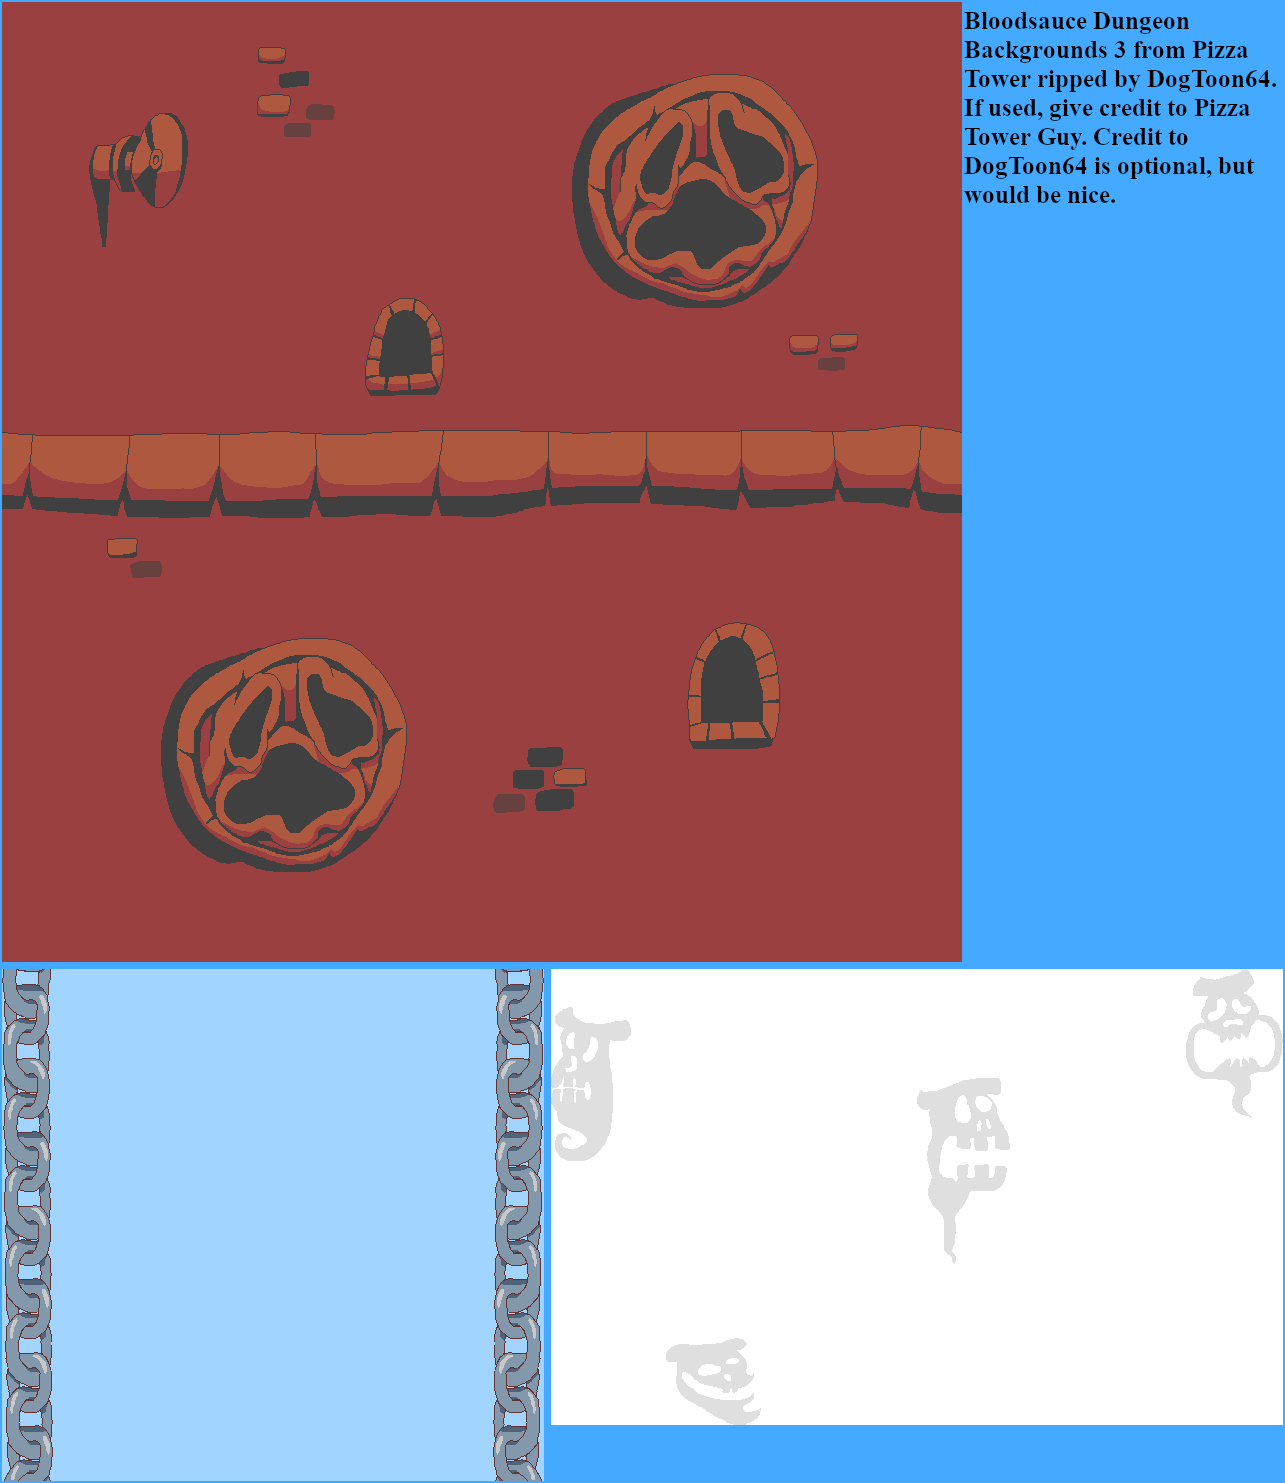 Pizza Tower - Bloodsauce Dungeon Backgrounds 2